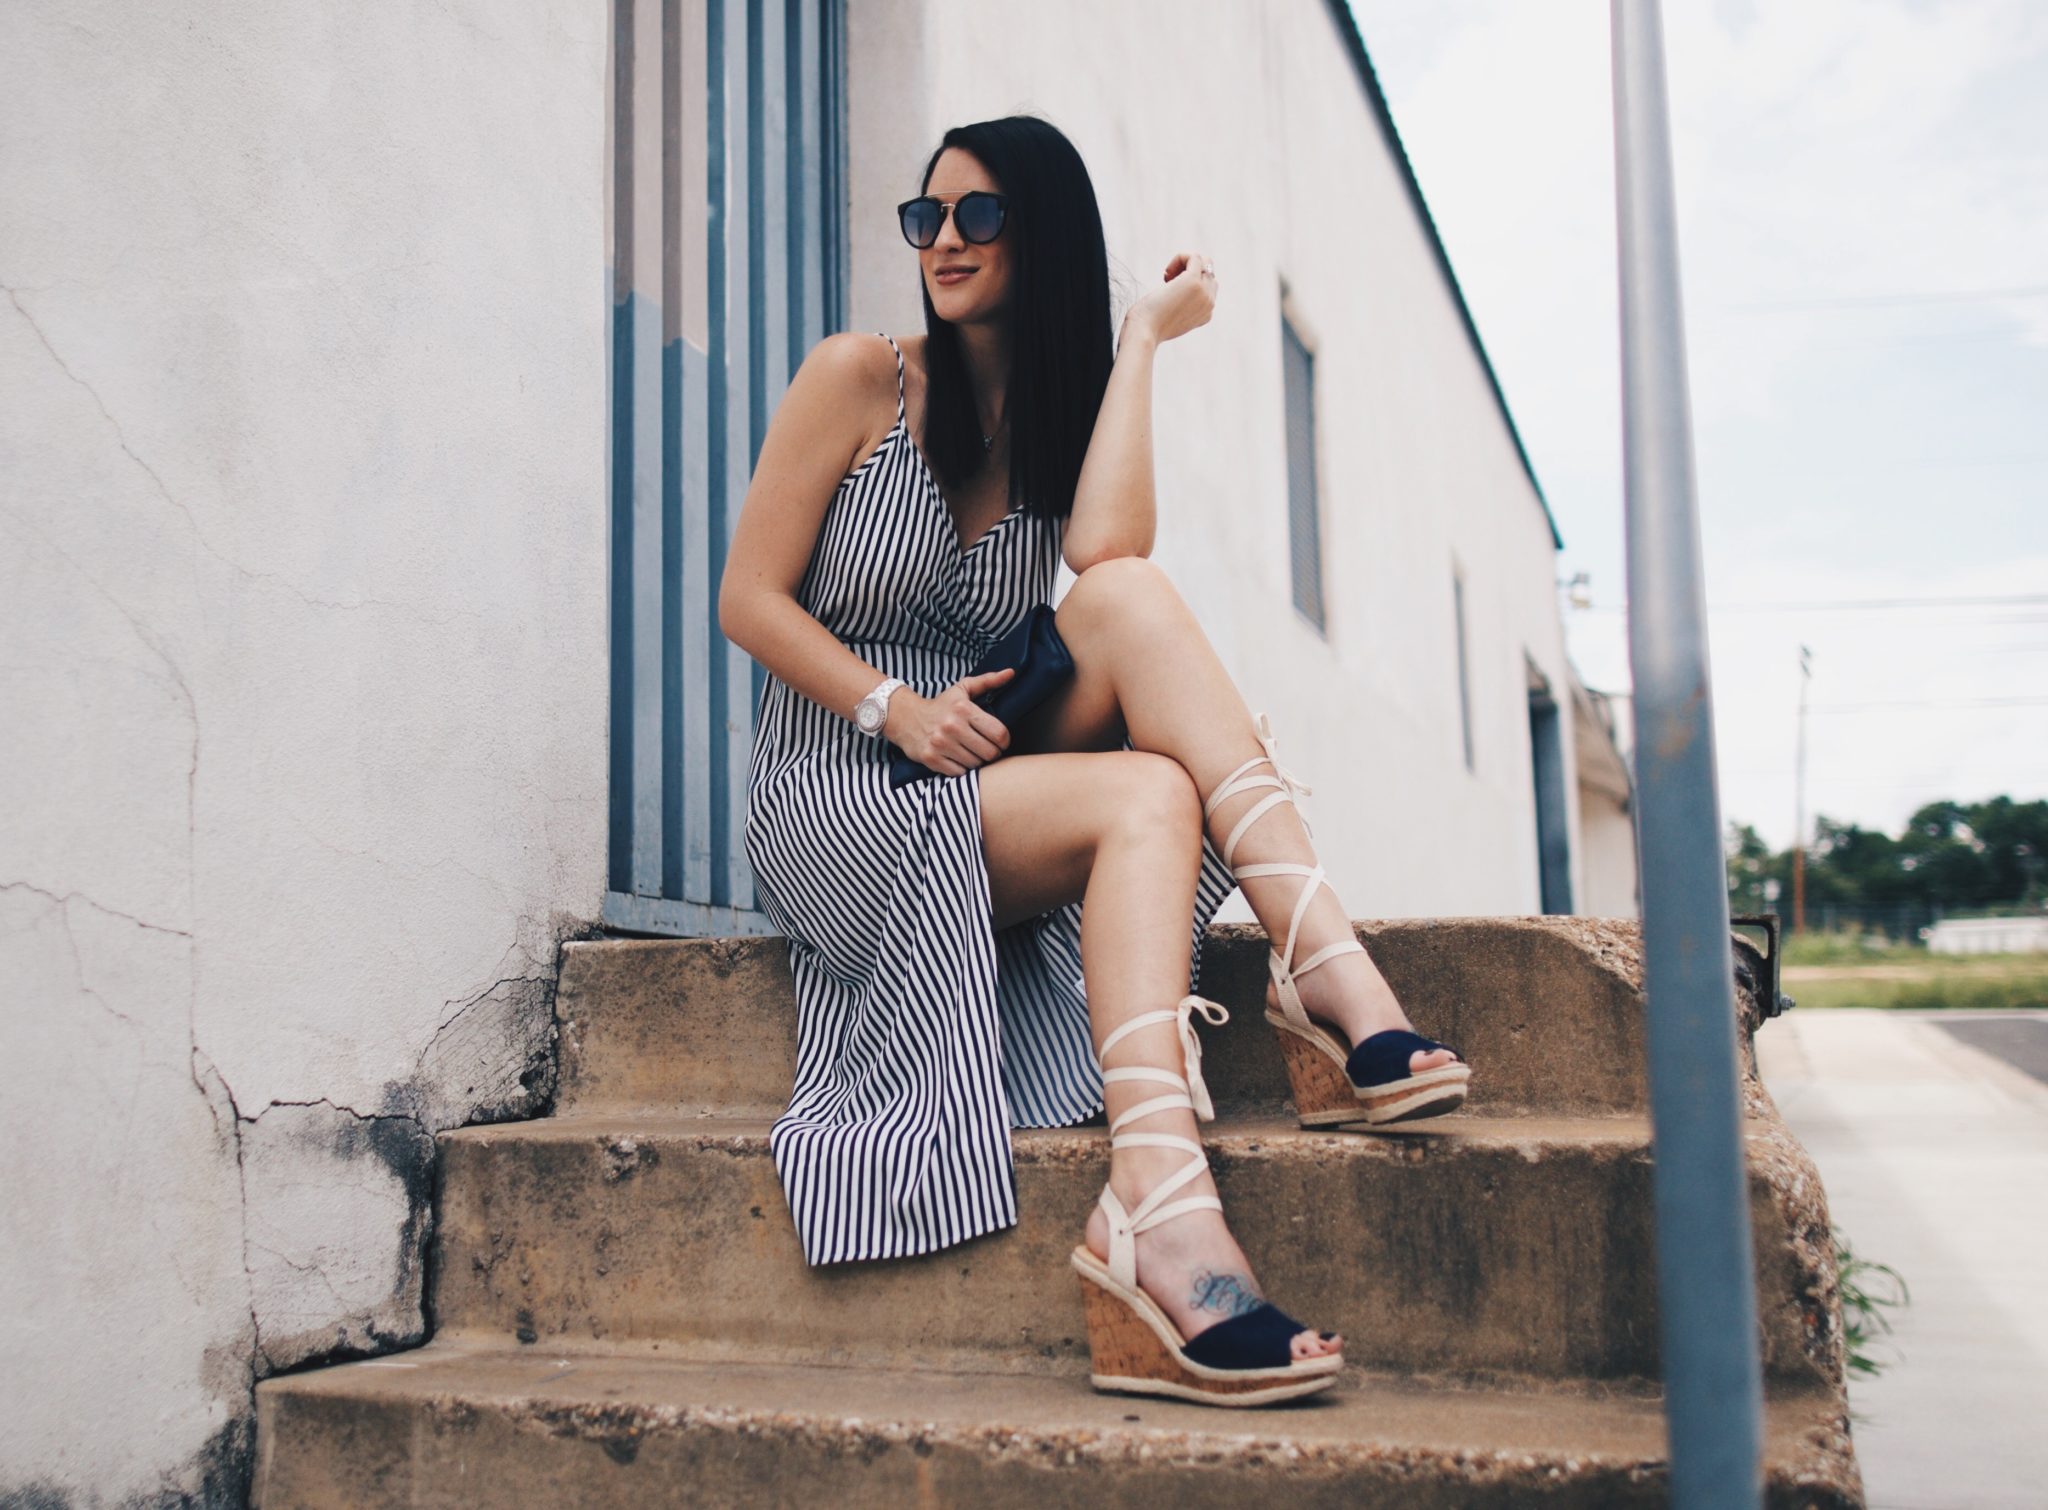 Striped Wrap Midi Dress | how to style a wrap dress | how to wear a wrap dress | wrap dress styling tips | summer fashion tips | summer outfit ideas | summer style tips | what to wear for summer | warm weather fashion | fashion for summer | style tips for summer | outfit ideas for summer || Dressed to Kill